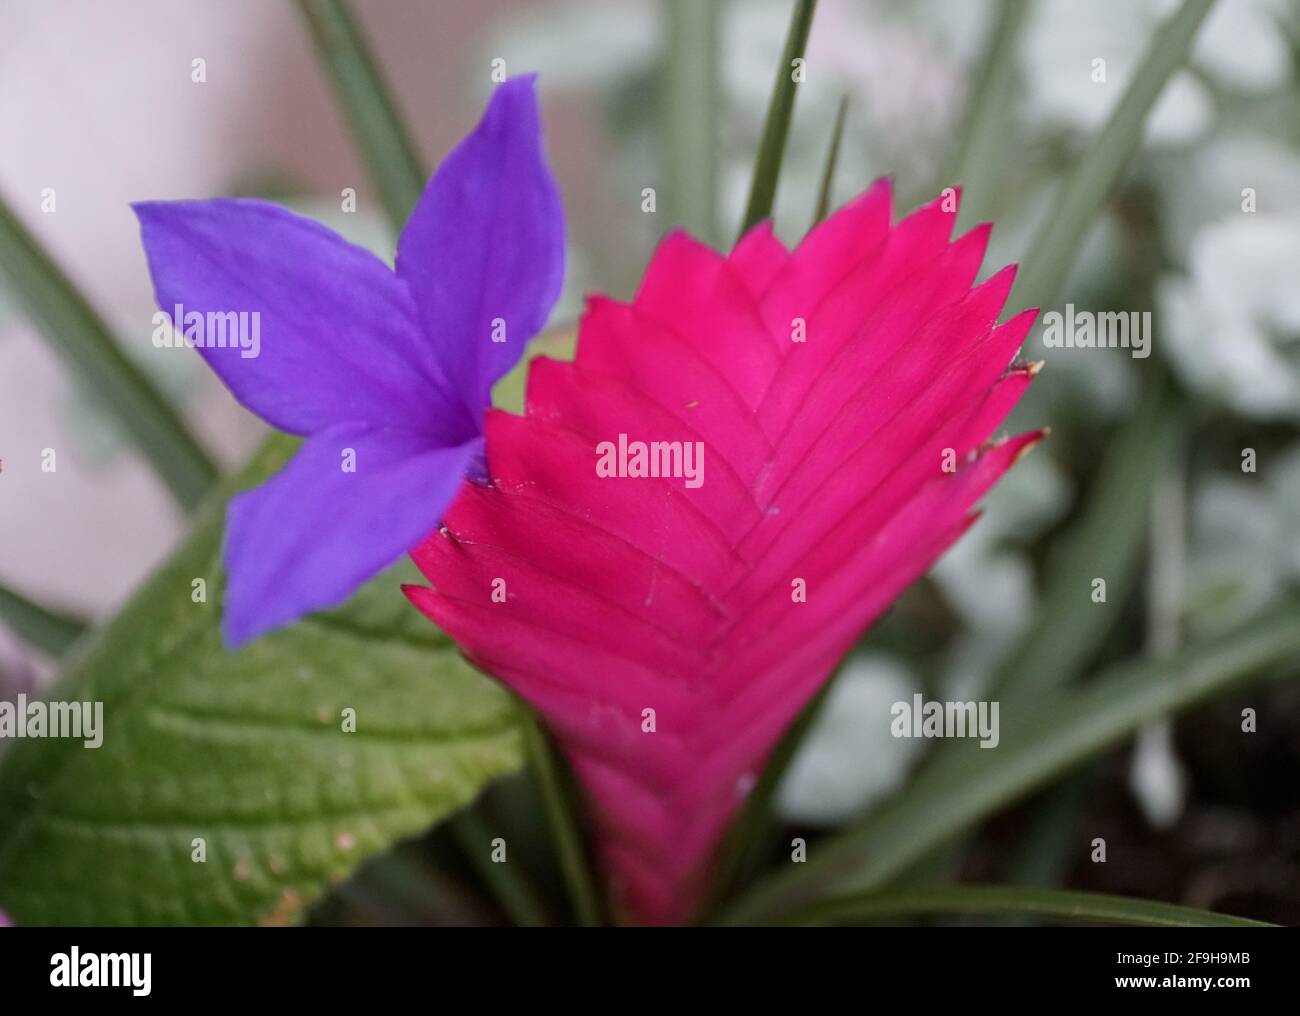 A Pink Quill plant with a blue flower from Bromeliad family Stock Photo